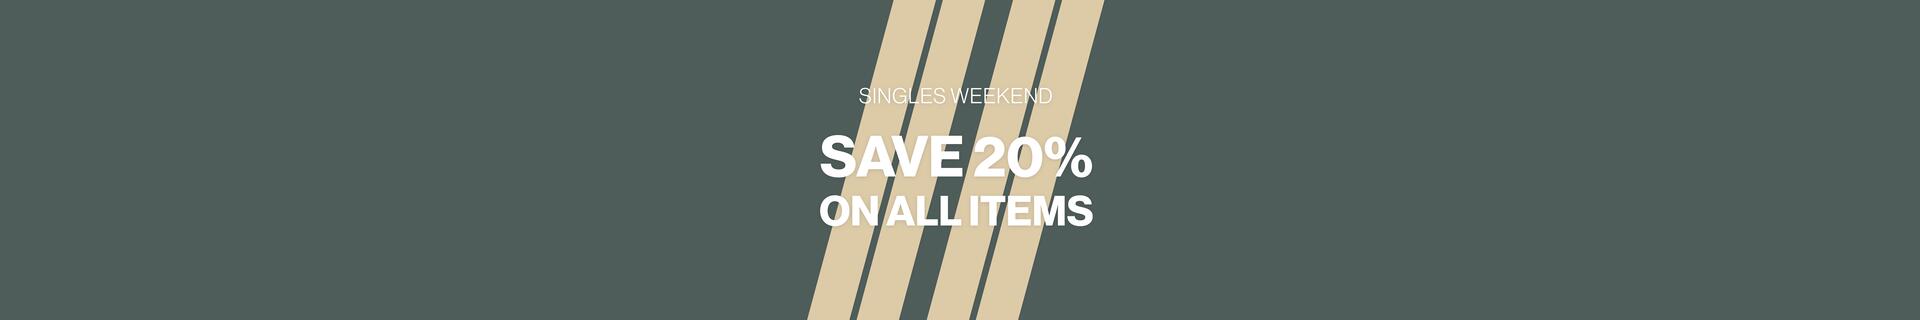 Singles day | 20% on all items | LINDBERGH